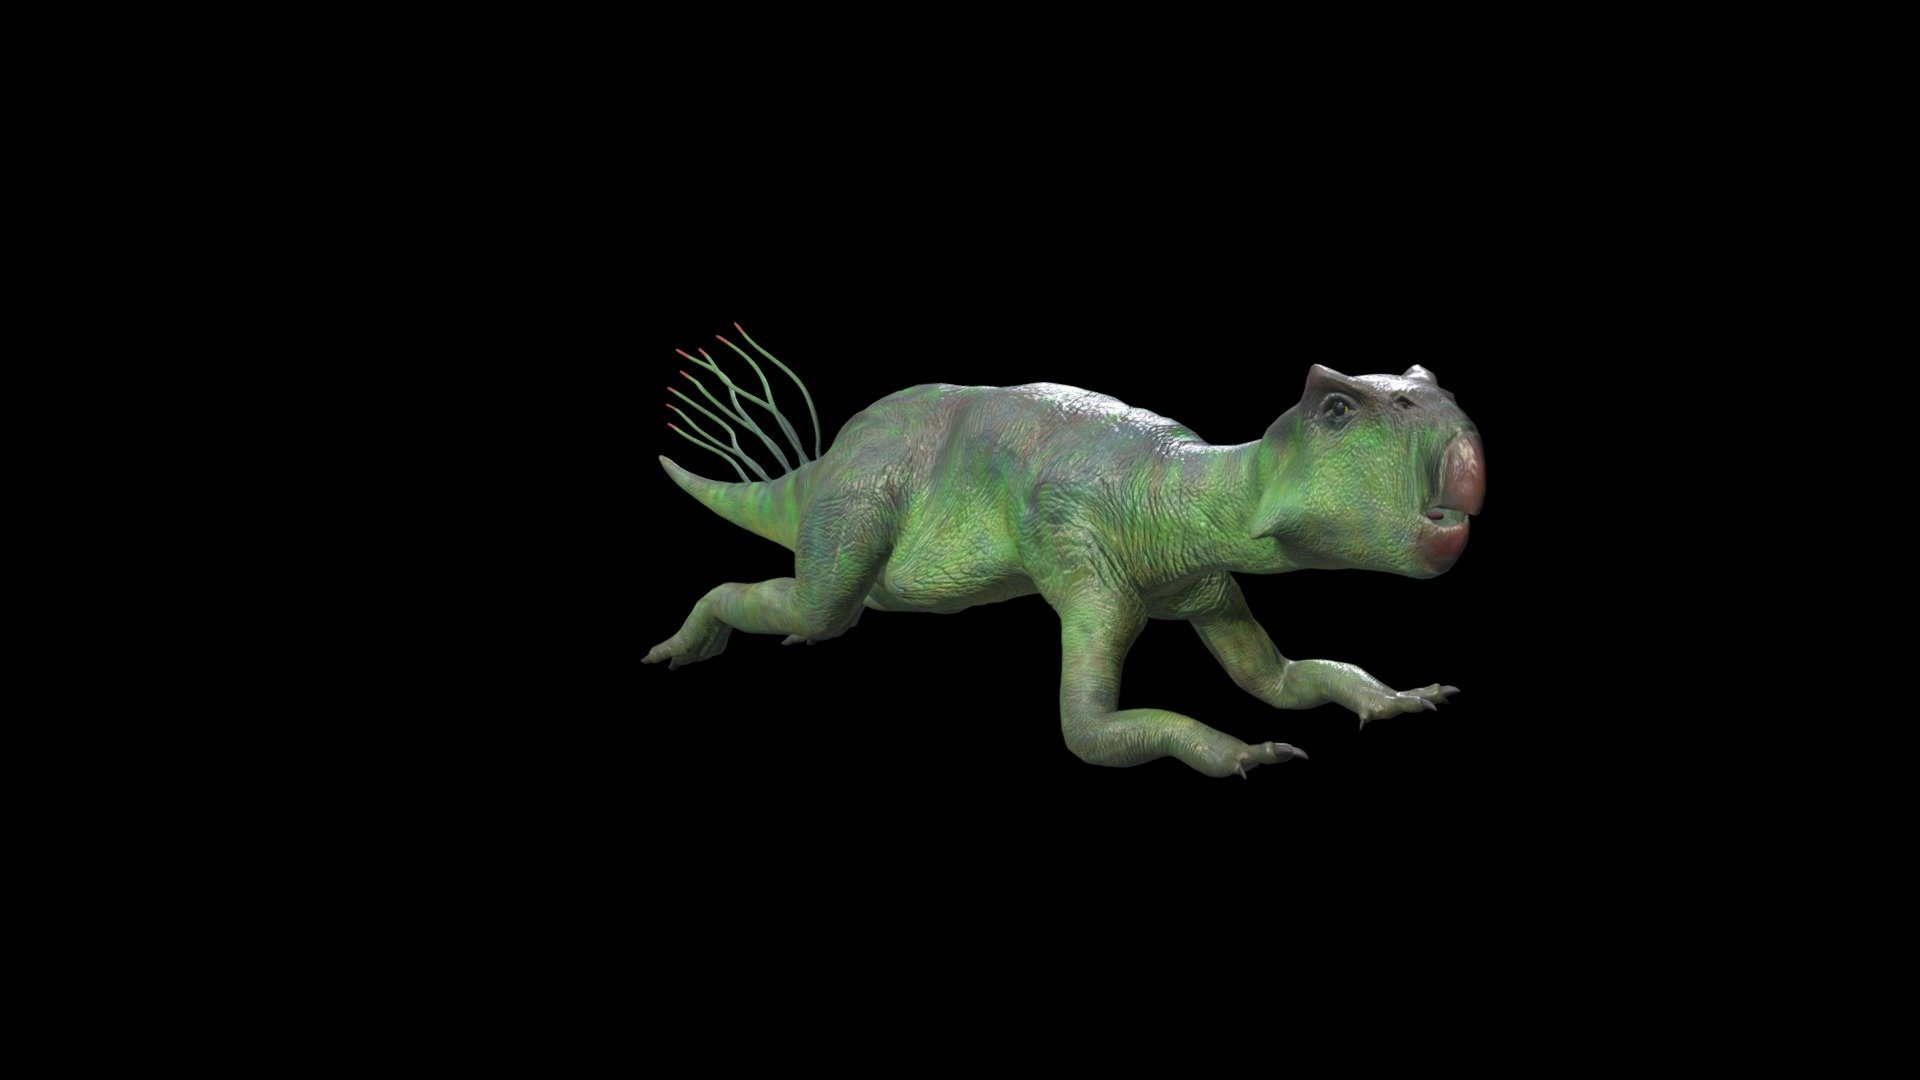 Project for the Exhitbition of Legends of the Giant Dinosaurs in Hong Kong Science Museum 2013-2014.
Psittacosaurus is a genus of extinct ceratopsian dinosaur from the Early Cretaceous of what is now Asia, existing between 123.2 and 100 million years ago 3d model